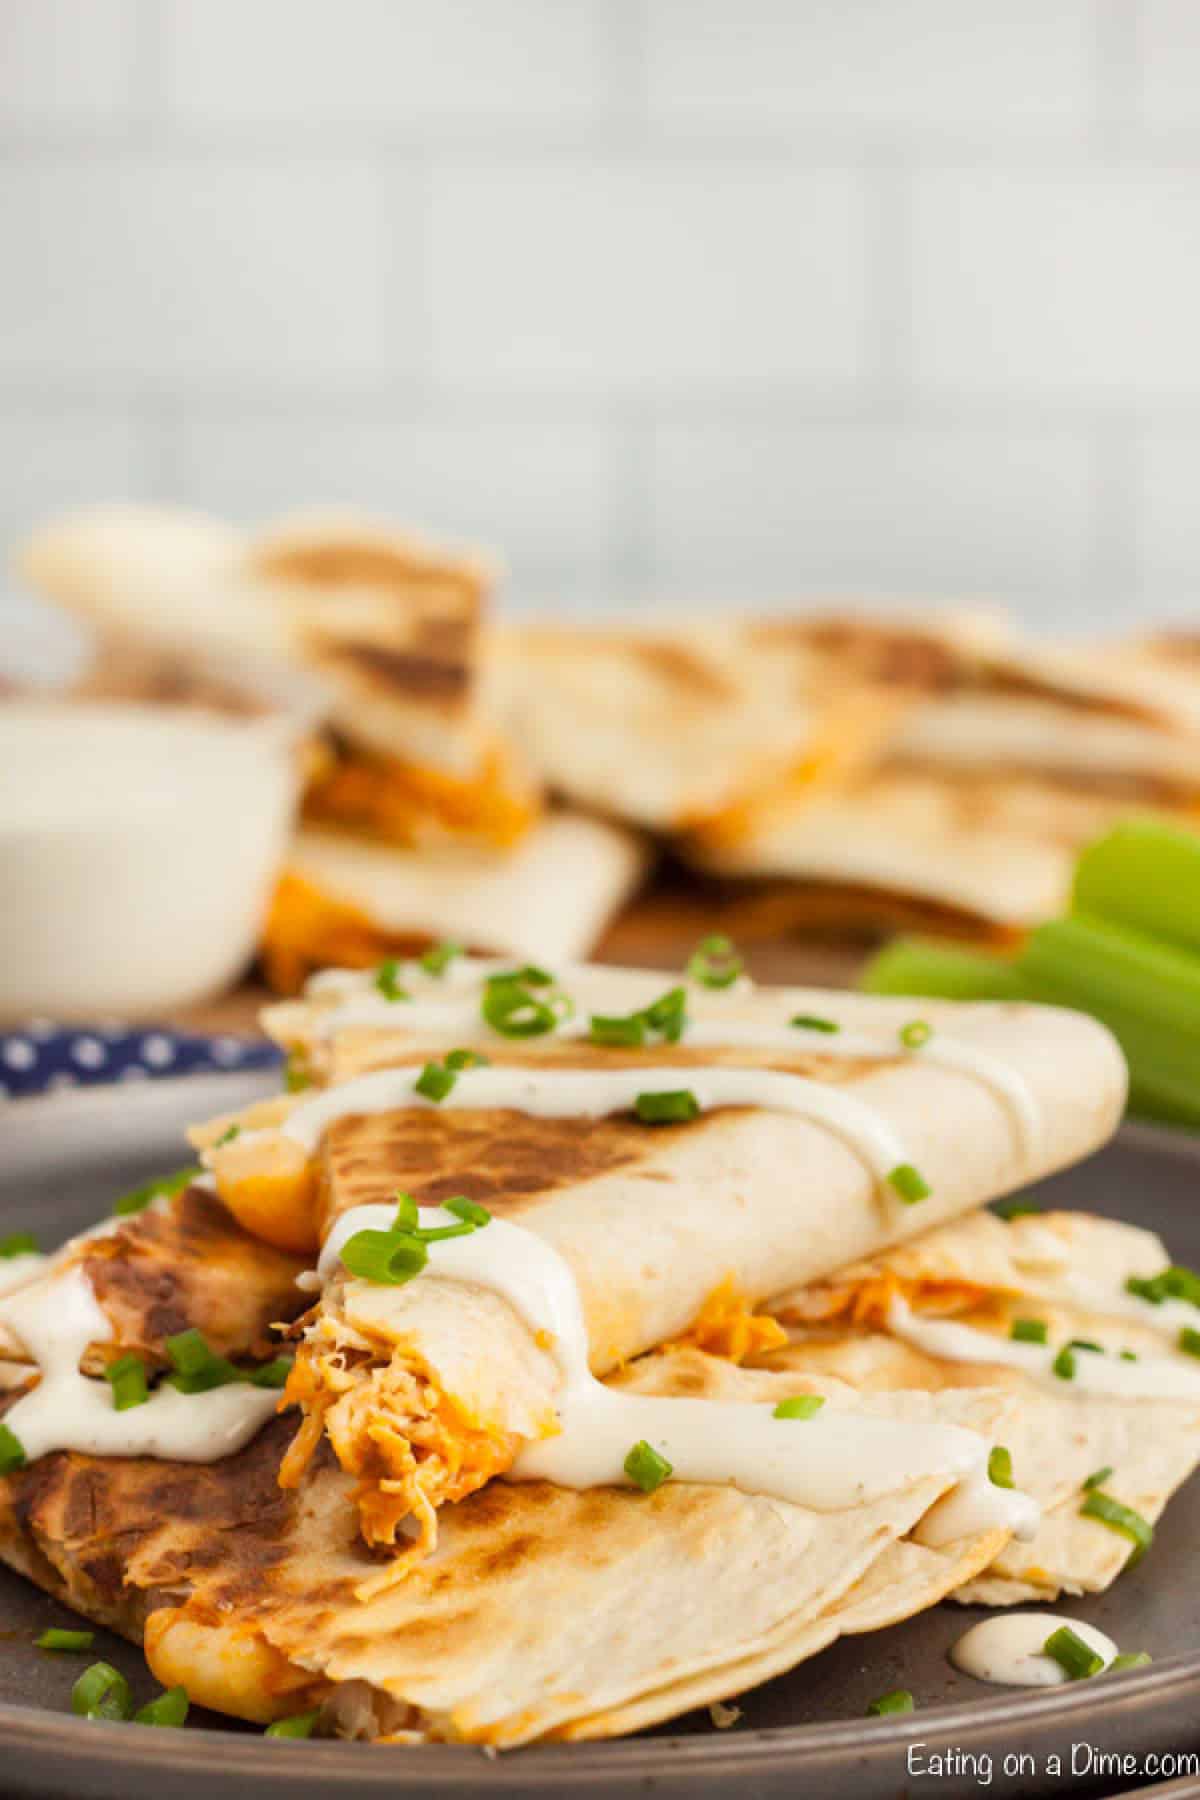 Buffalo Chicken Quesadillas stacked on a plate with sour cream drizzled on top with chopped green onions